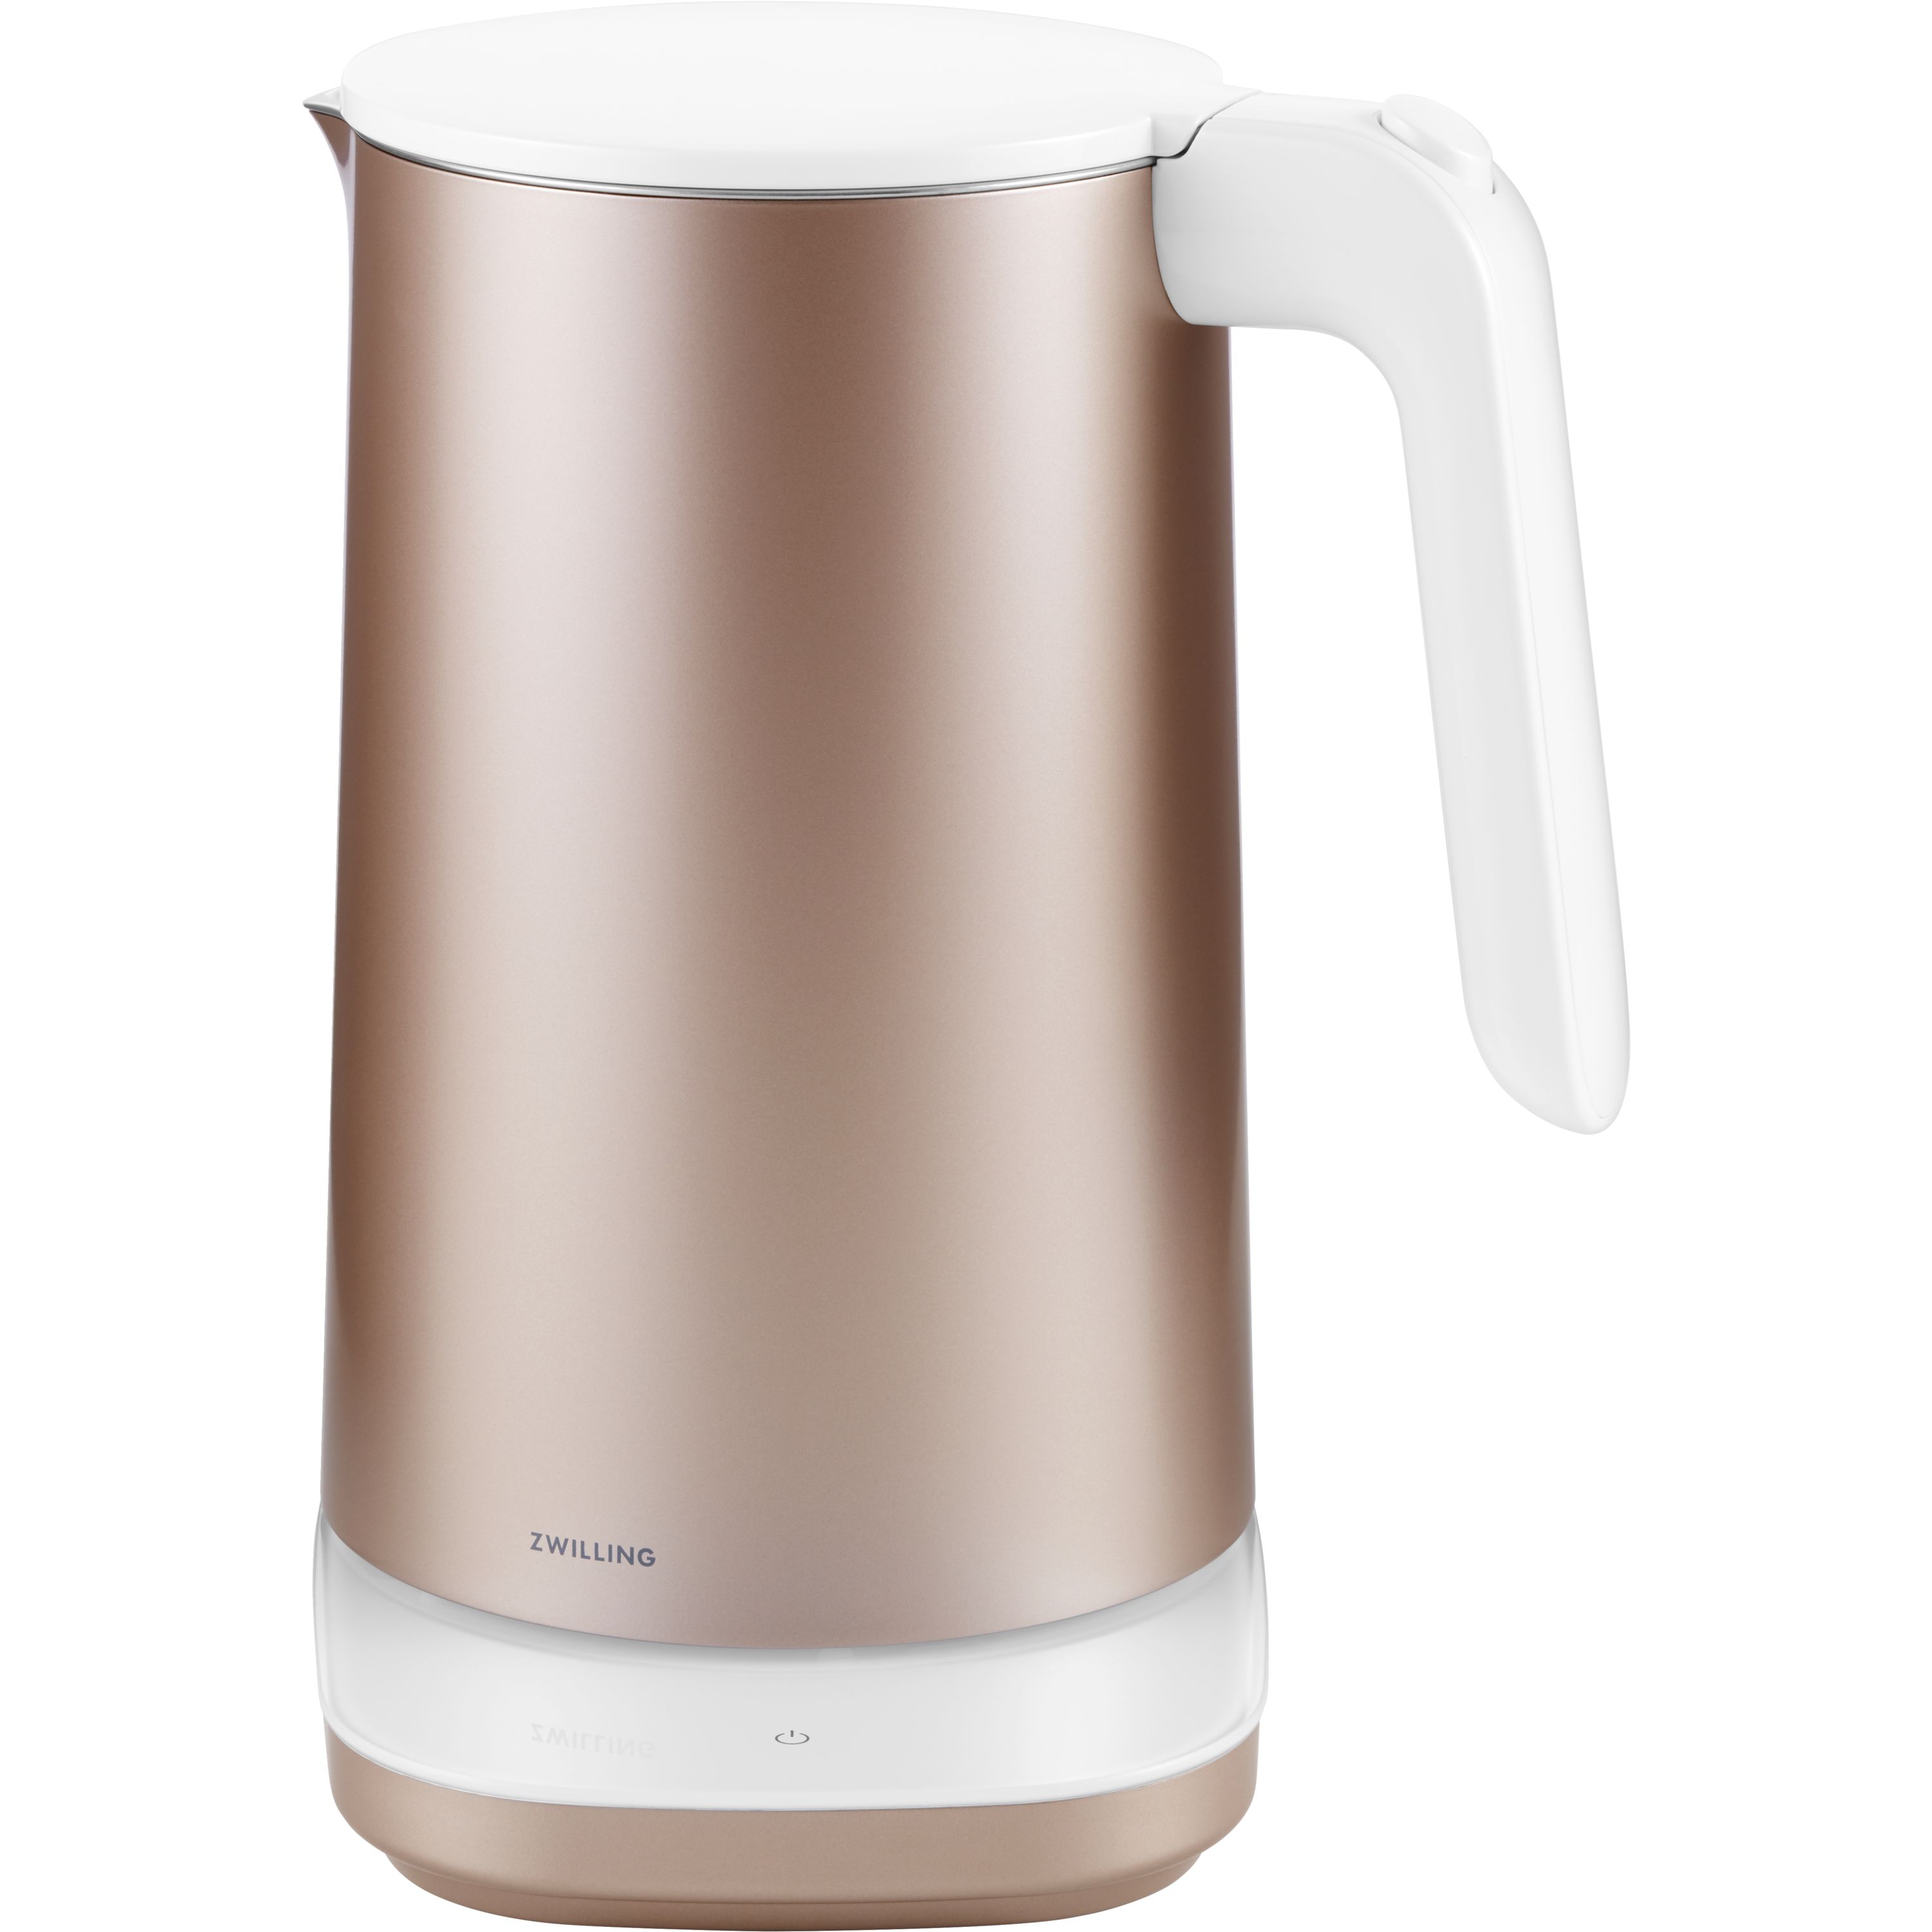 Smart Temp Digital Kettle Full Stainless Interior, Double-layer